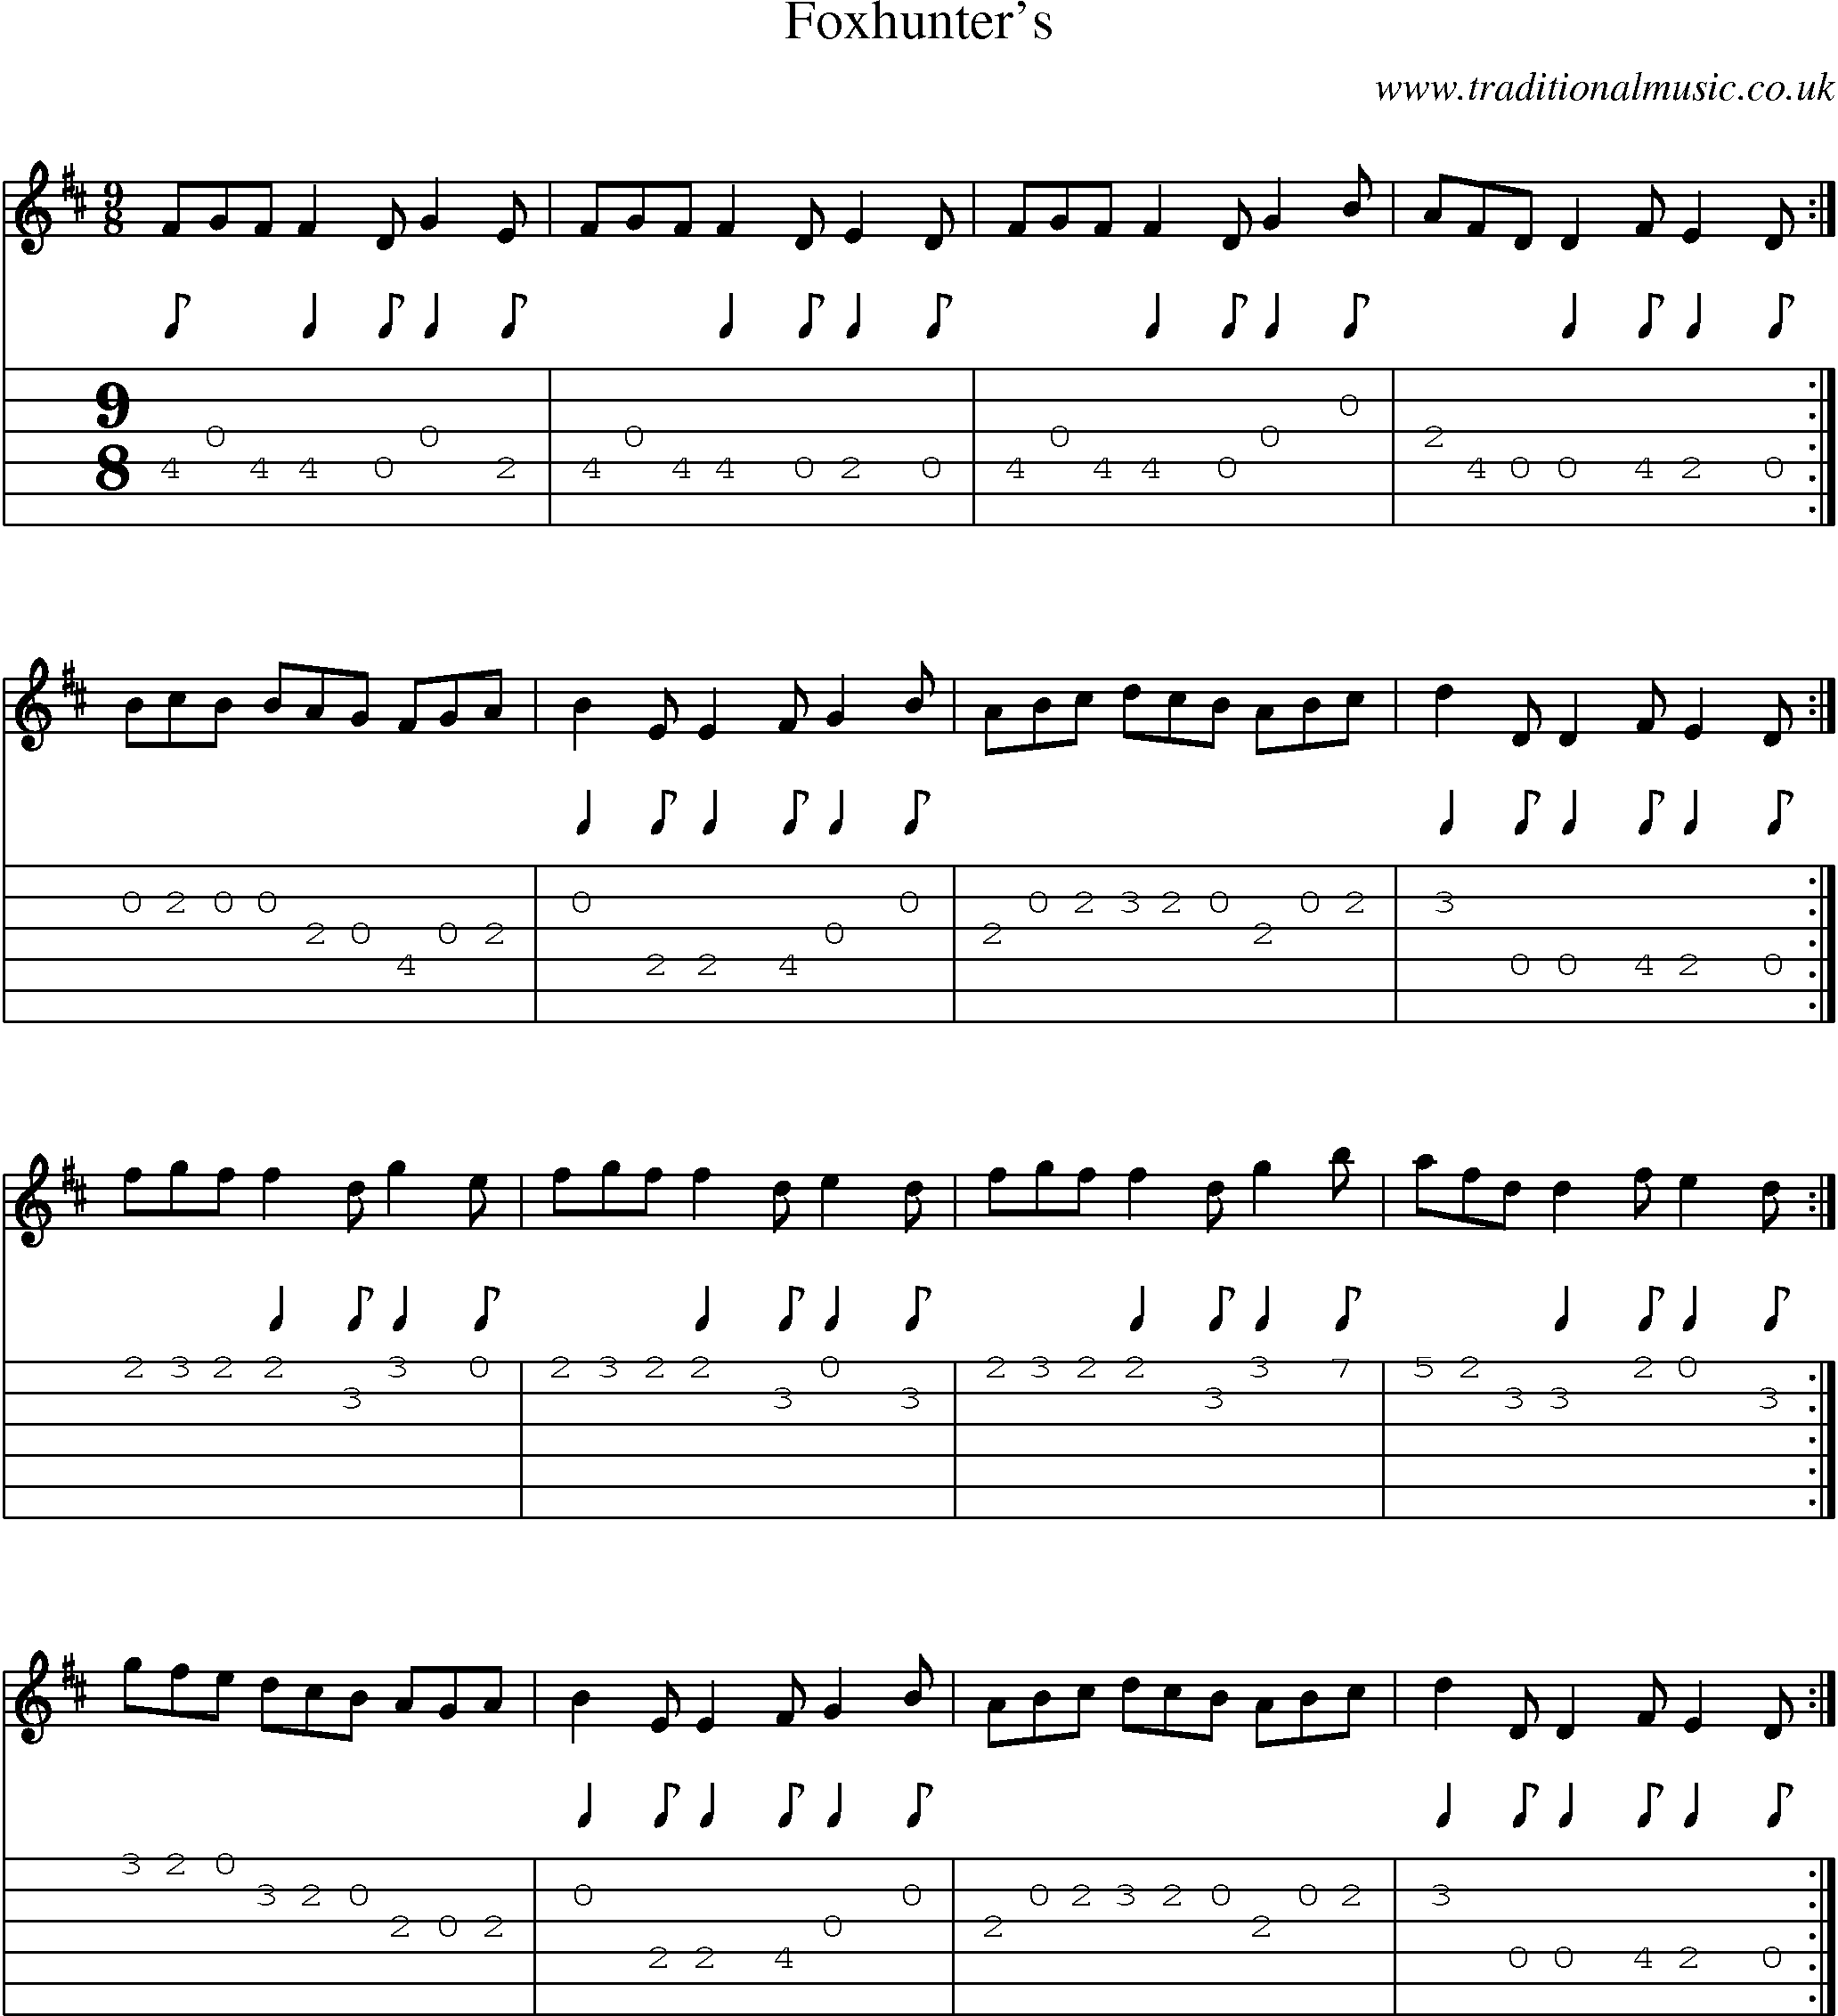 Music Score and Guitar Tabs for Foxhunters